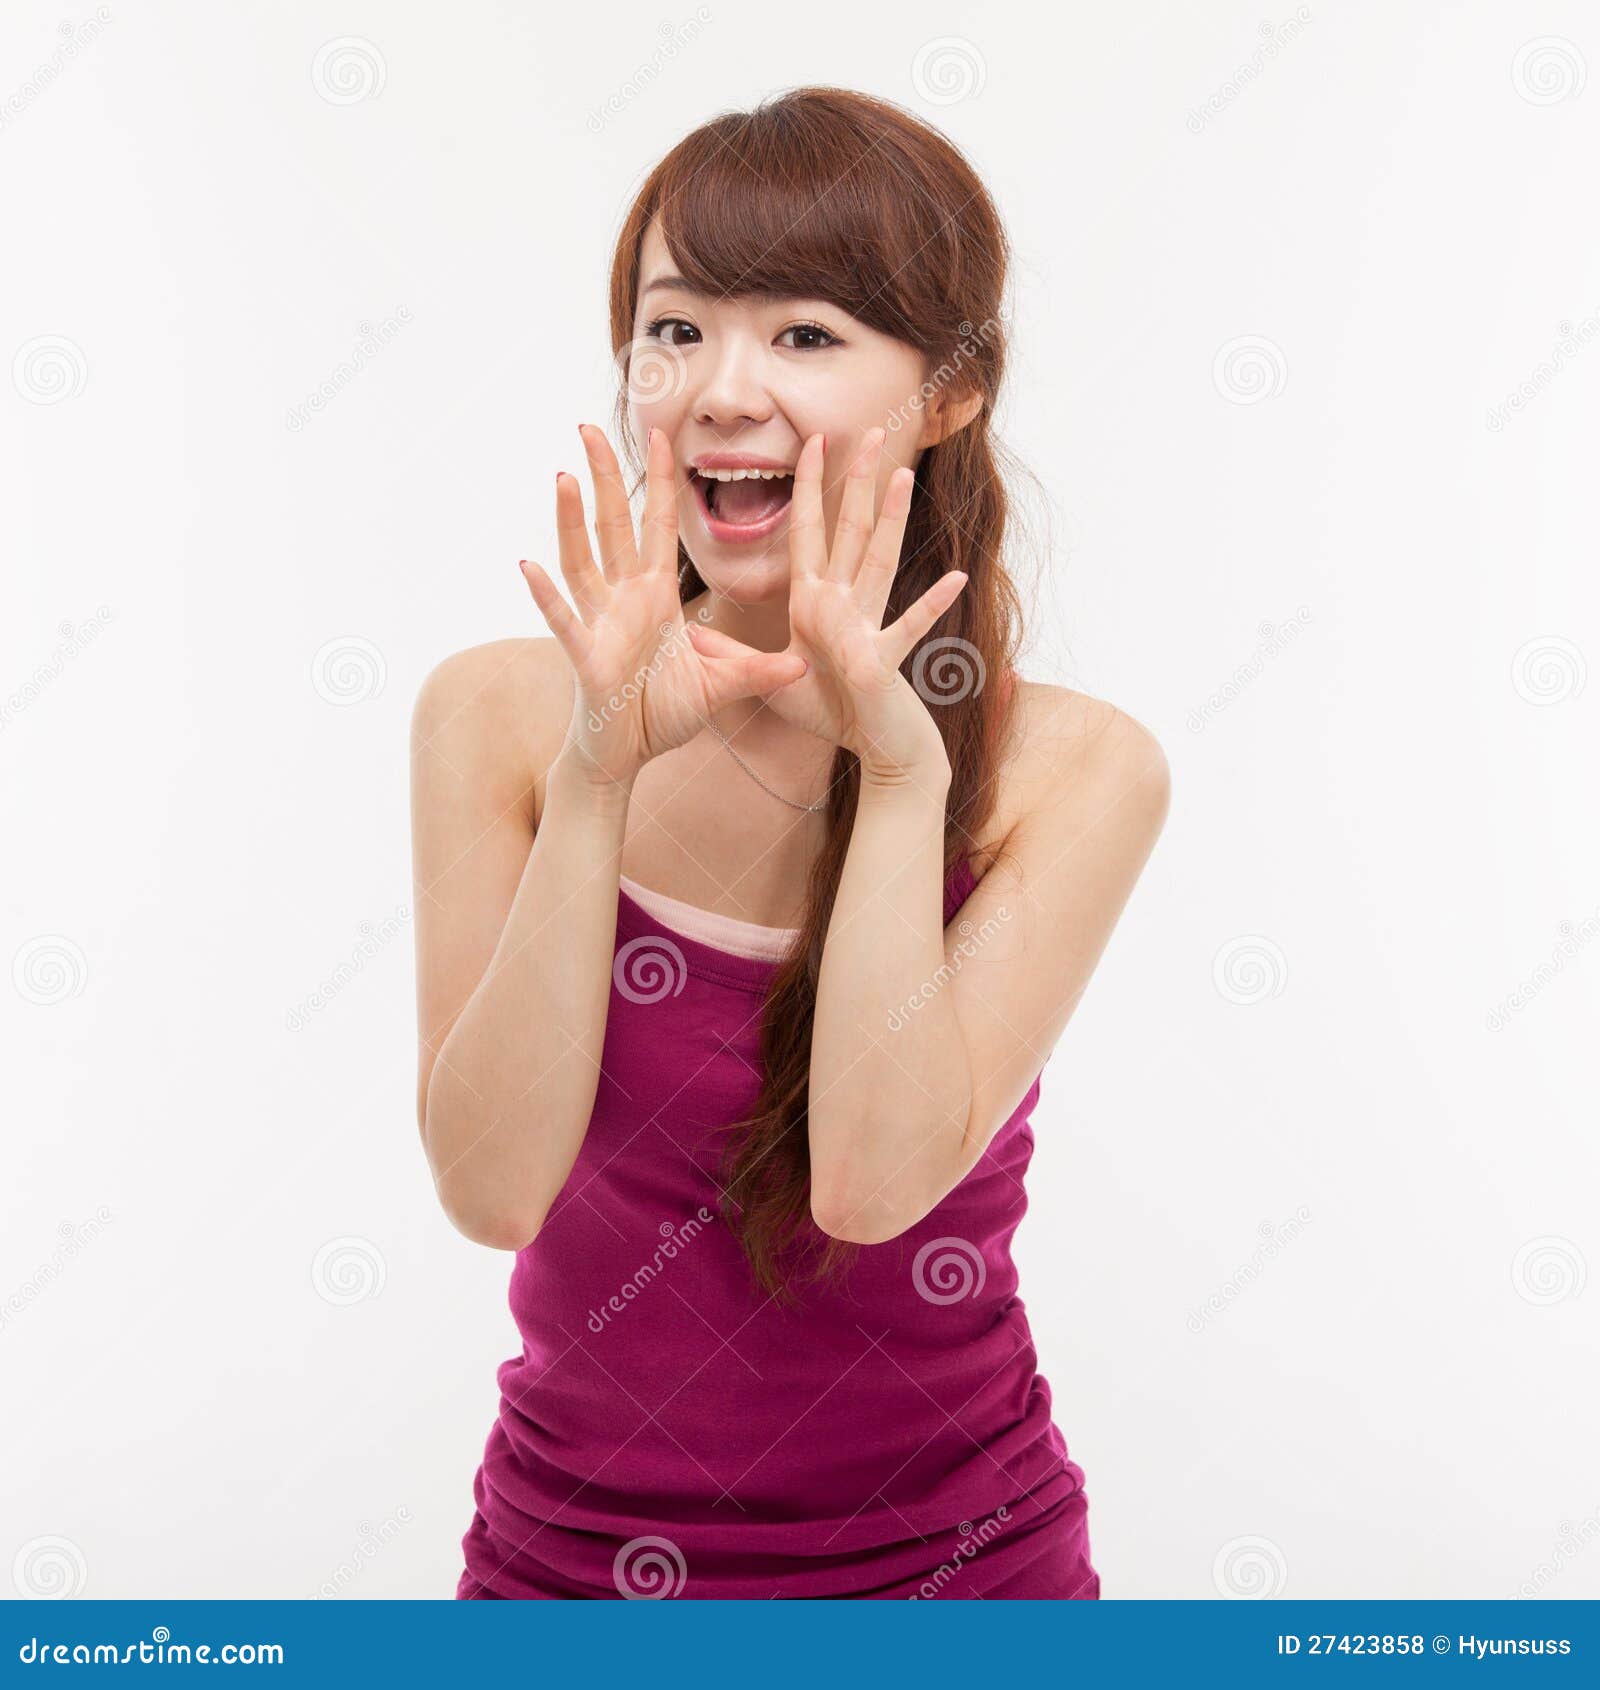 Talking young Asian woman stock photo. Image of attractive - 27423858